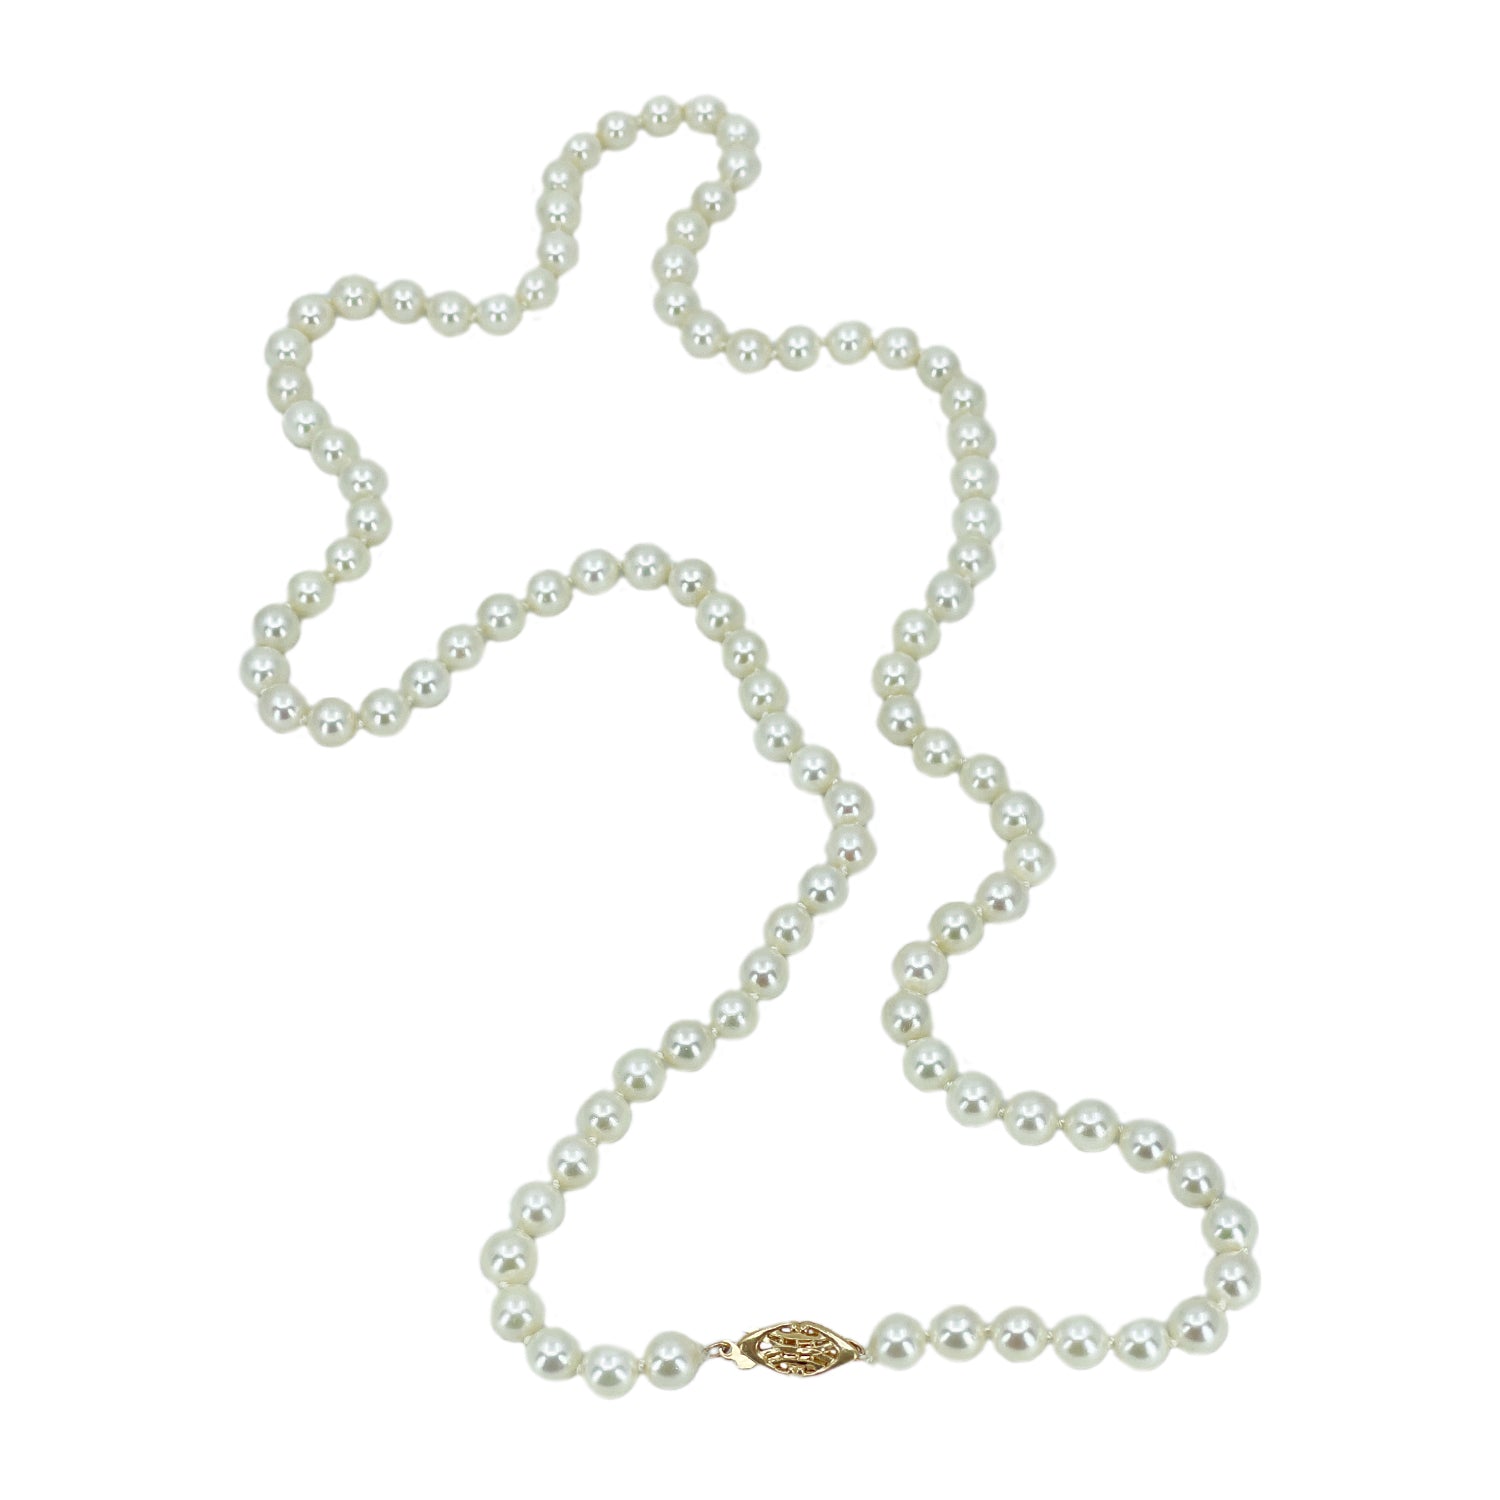 Opera Length Vintage Saltwater Japanese Cultured Akoya Pearl Necklace Strand - 14K White Gold 29.50 Inch